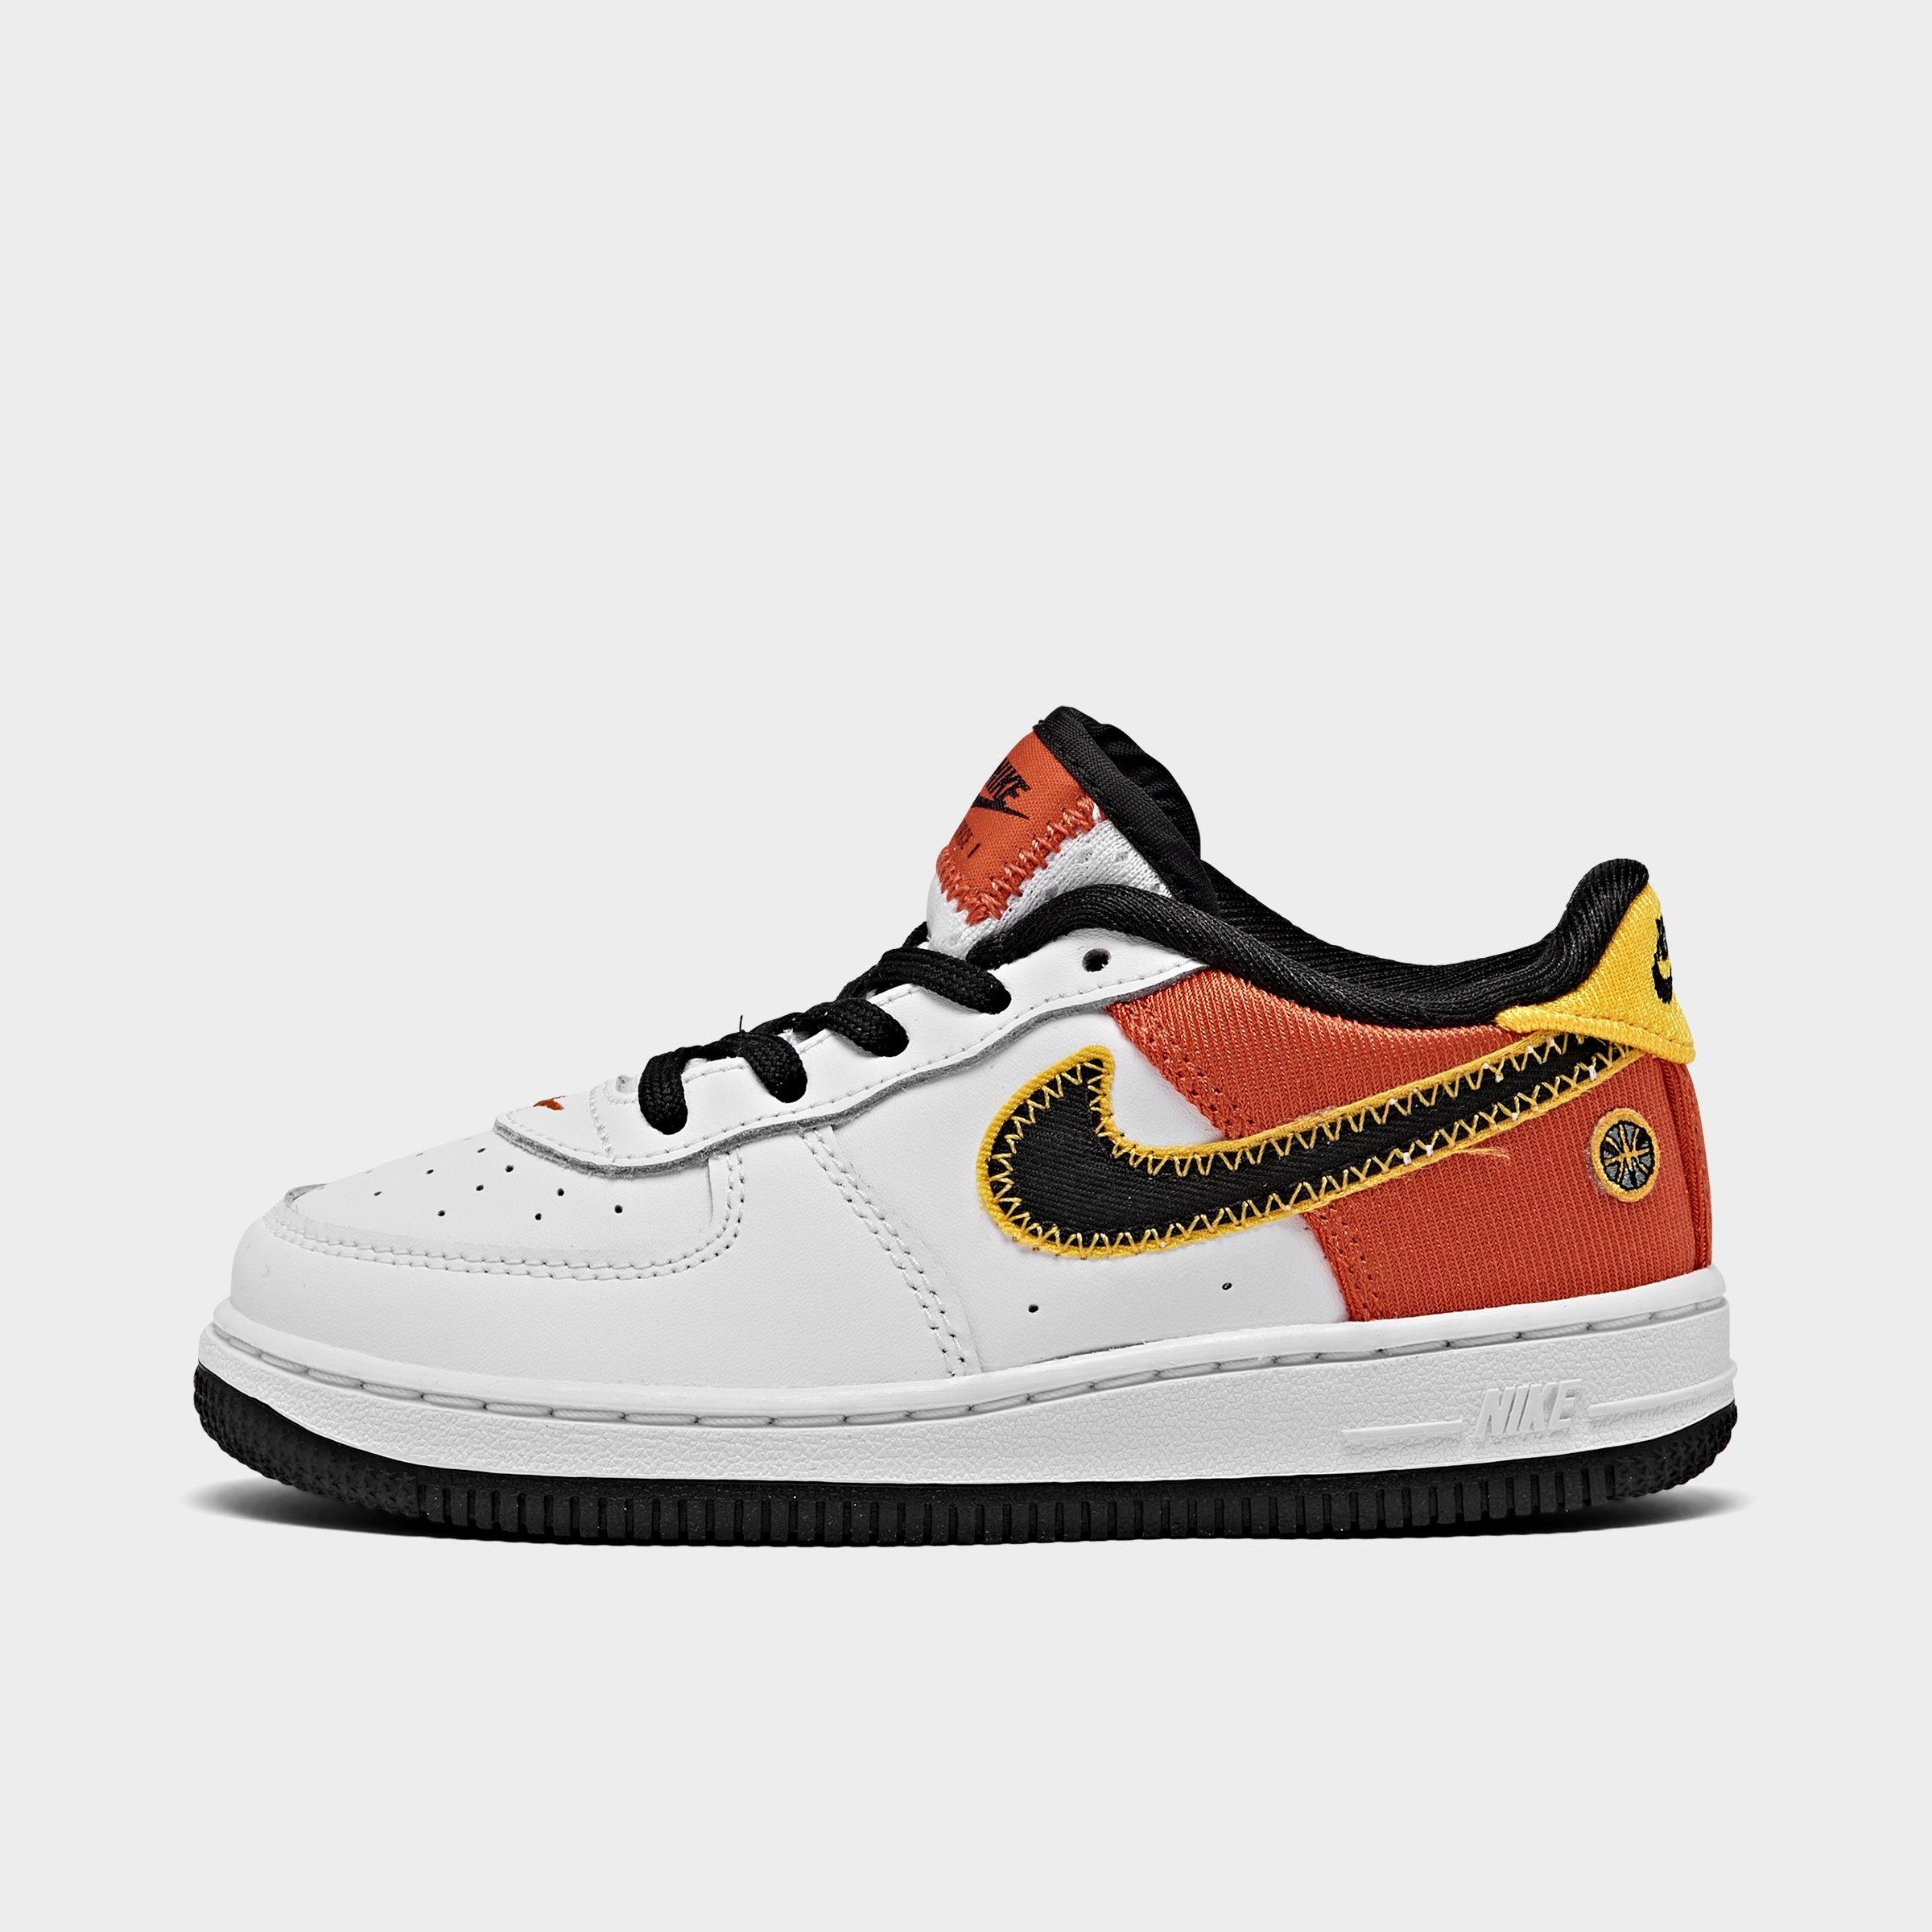 finish line air force 1 kids